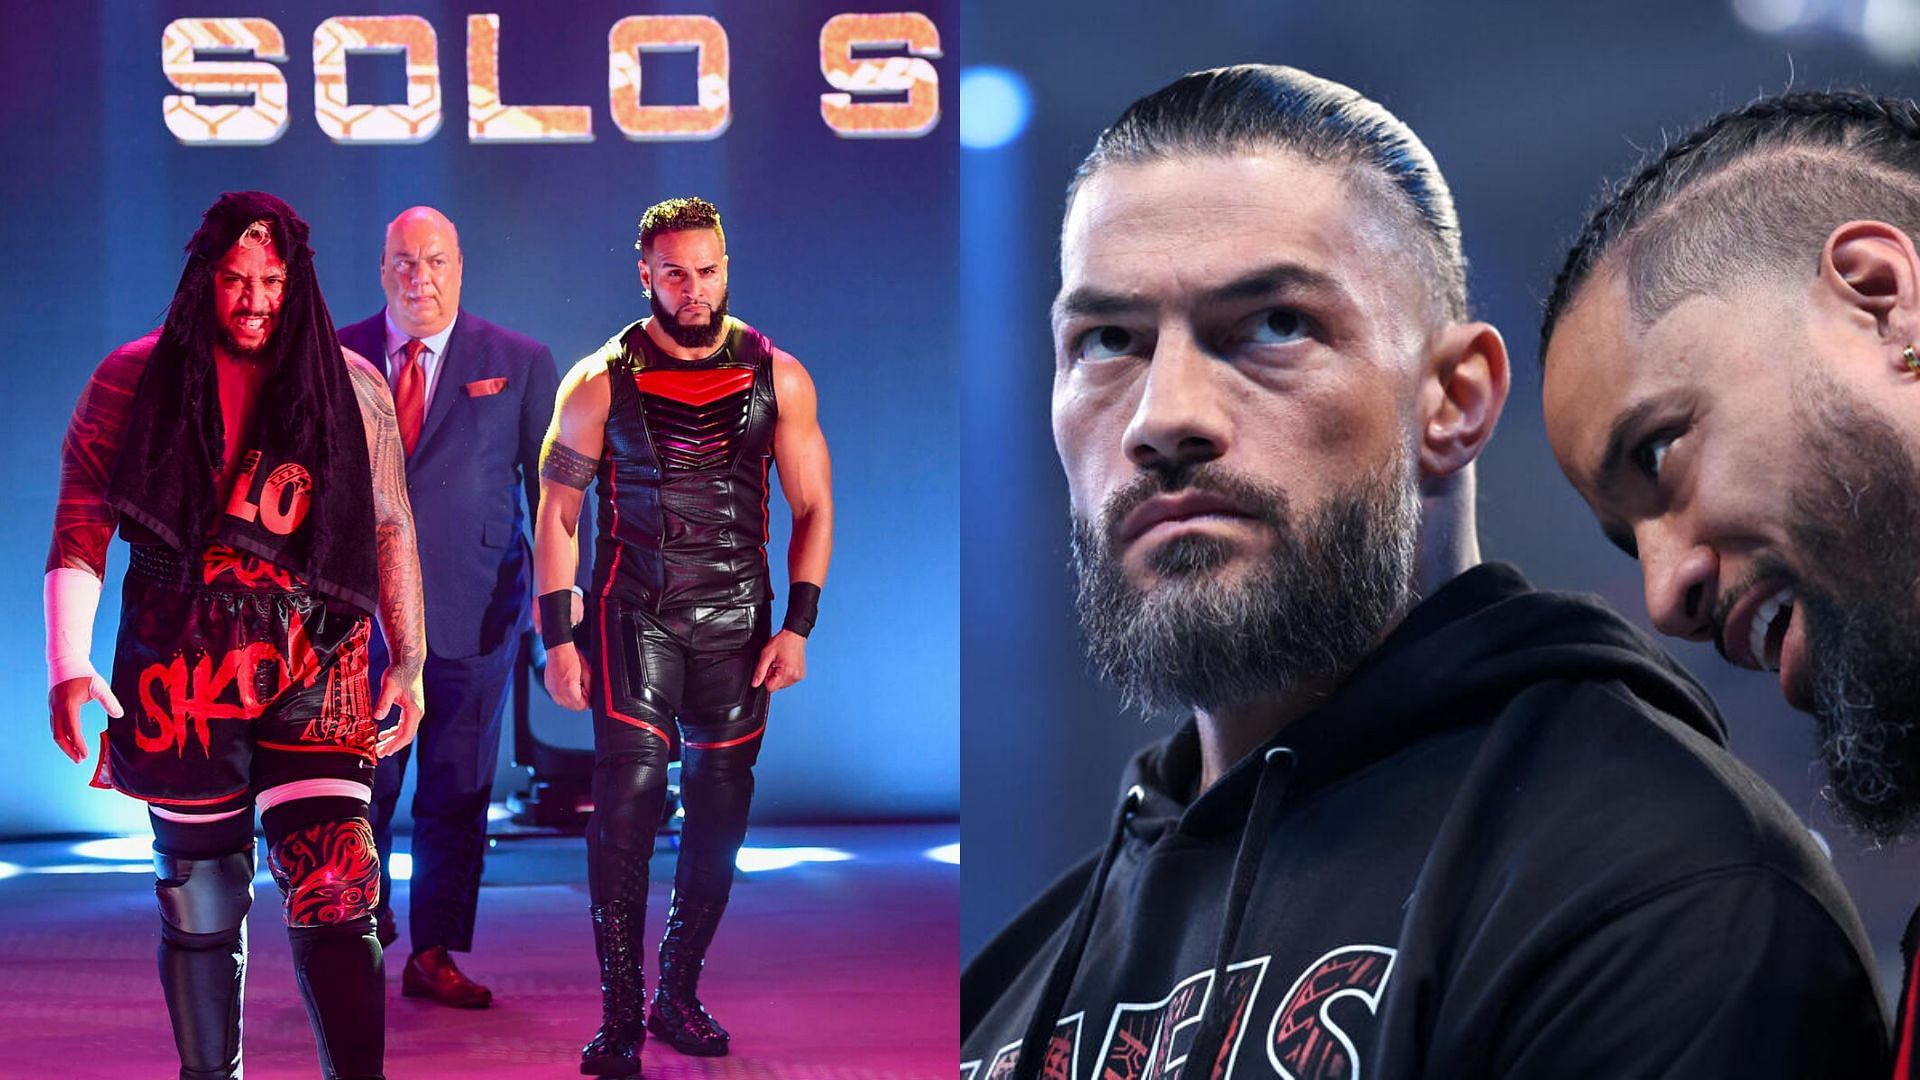 The bloodline is still riding high, but some potential issues have emerged [Images from WWE.com]